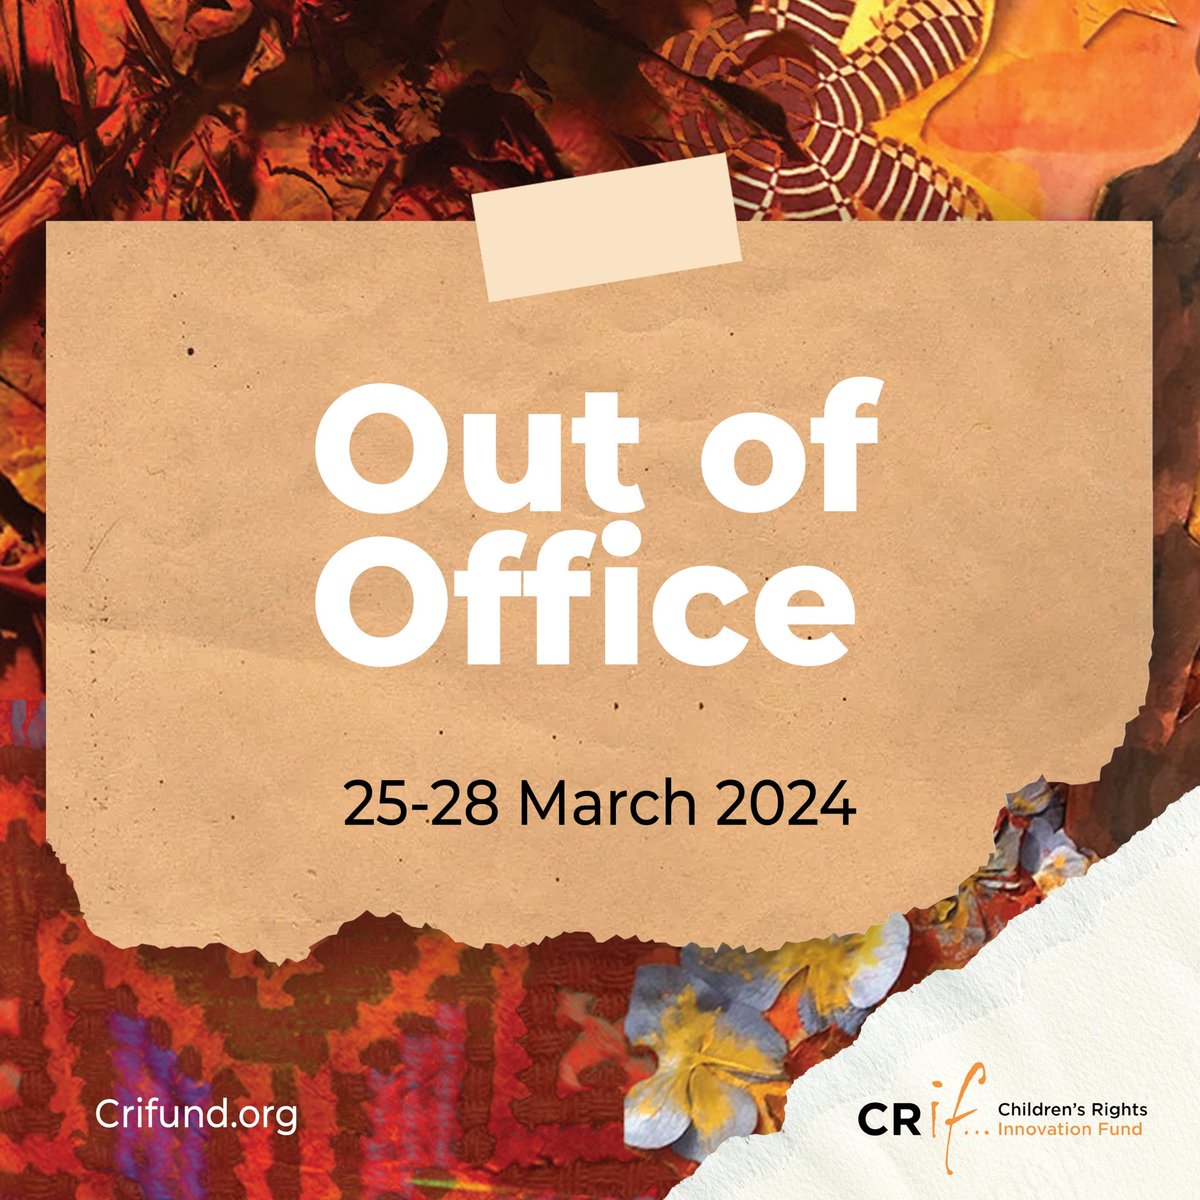 As we continue to dream and inflence the sector towards What's Possible when we follow young people’s lead, we've decided to take a break from the 25 - 28 March. See you soon after our well-deserved rest!